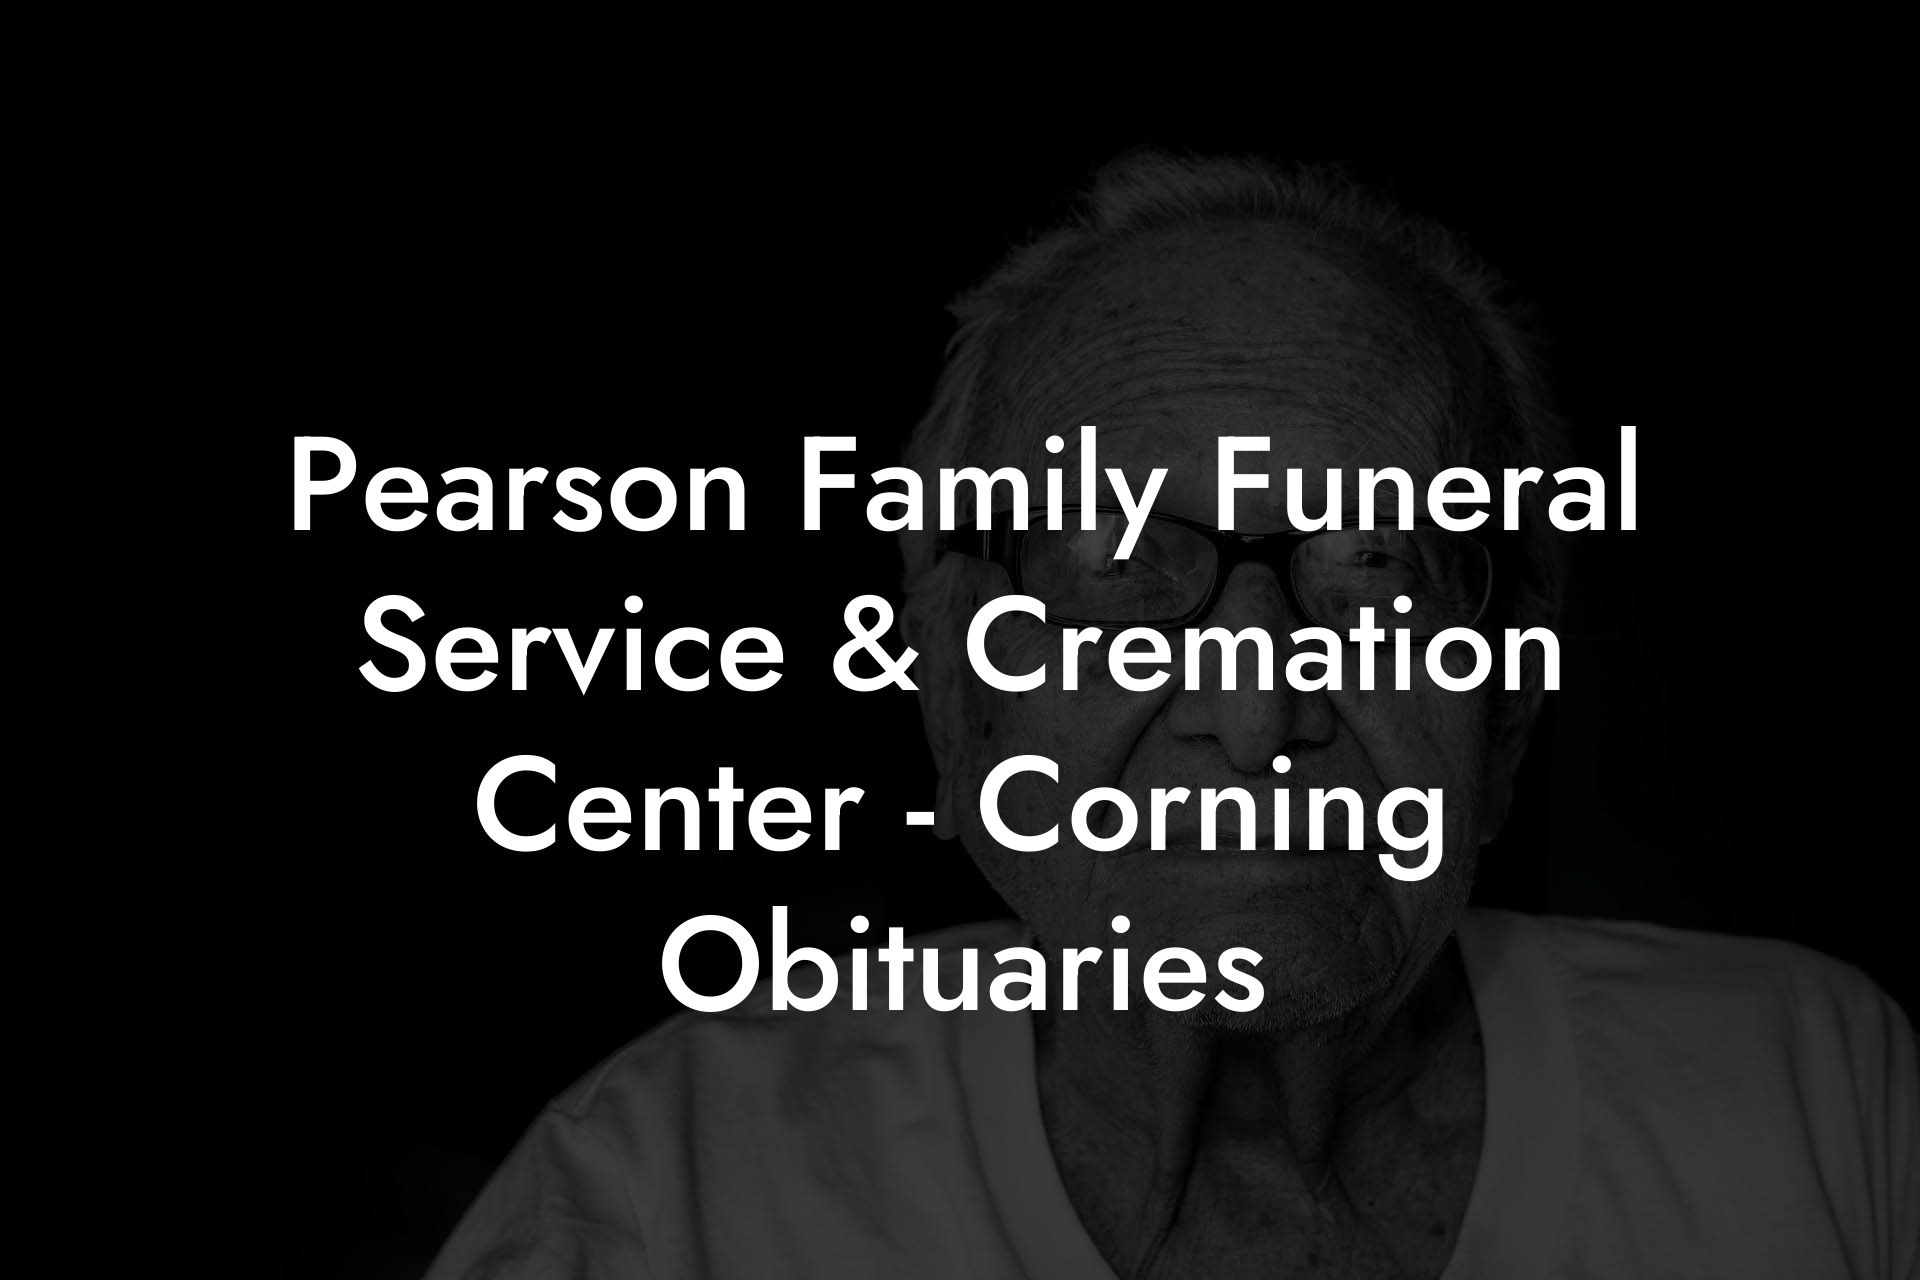 Pearson Family Funeral Service & Cremation Center - Corning Obituaries